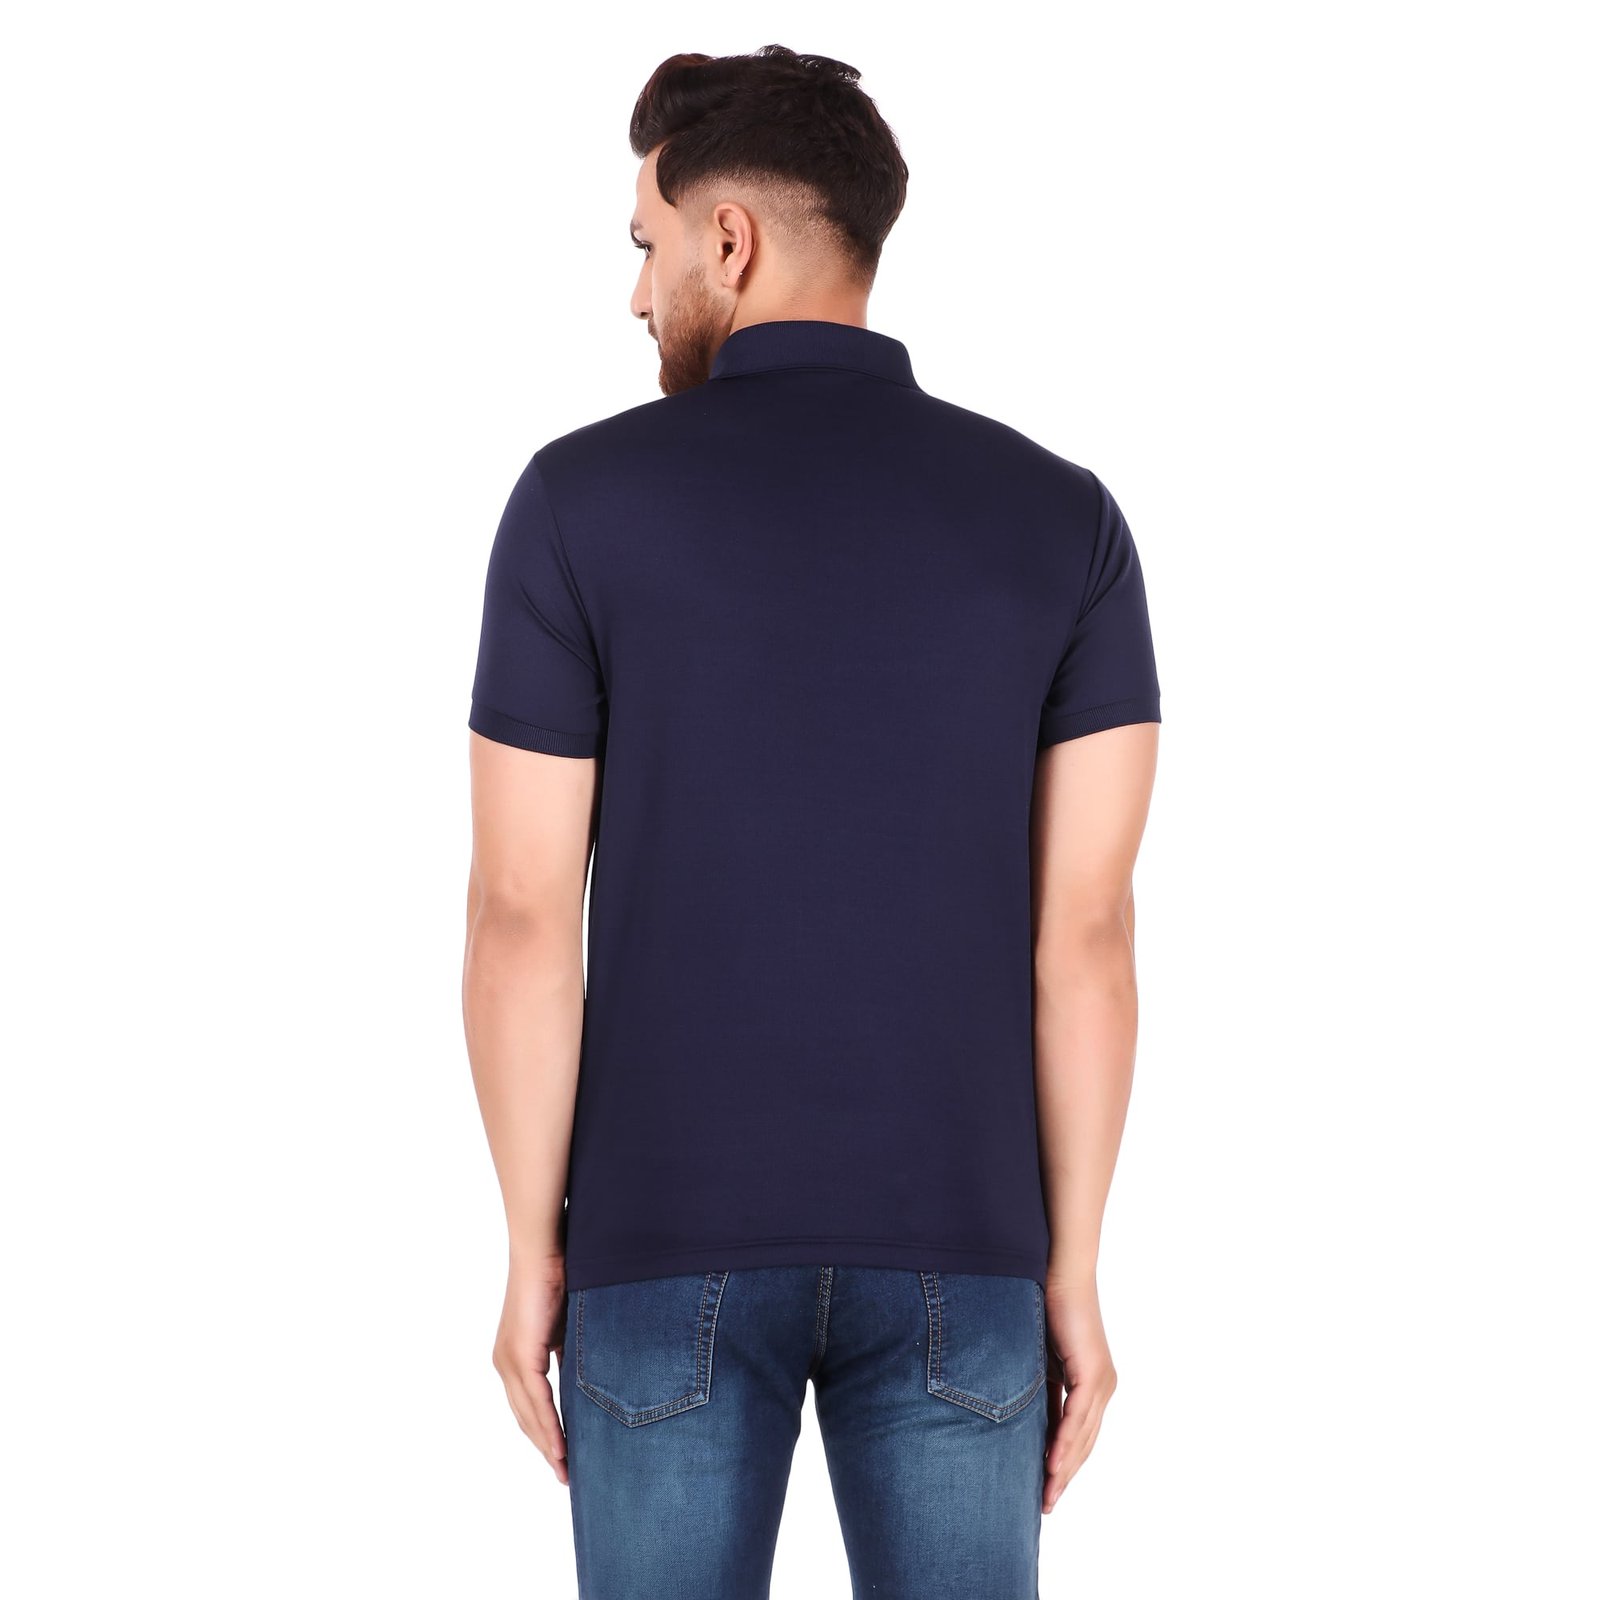 Buy Richard Paadler Sustainable Blue Men's Polo T-shirts Online